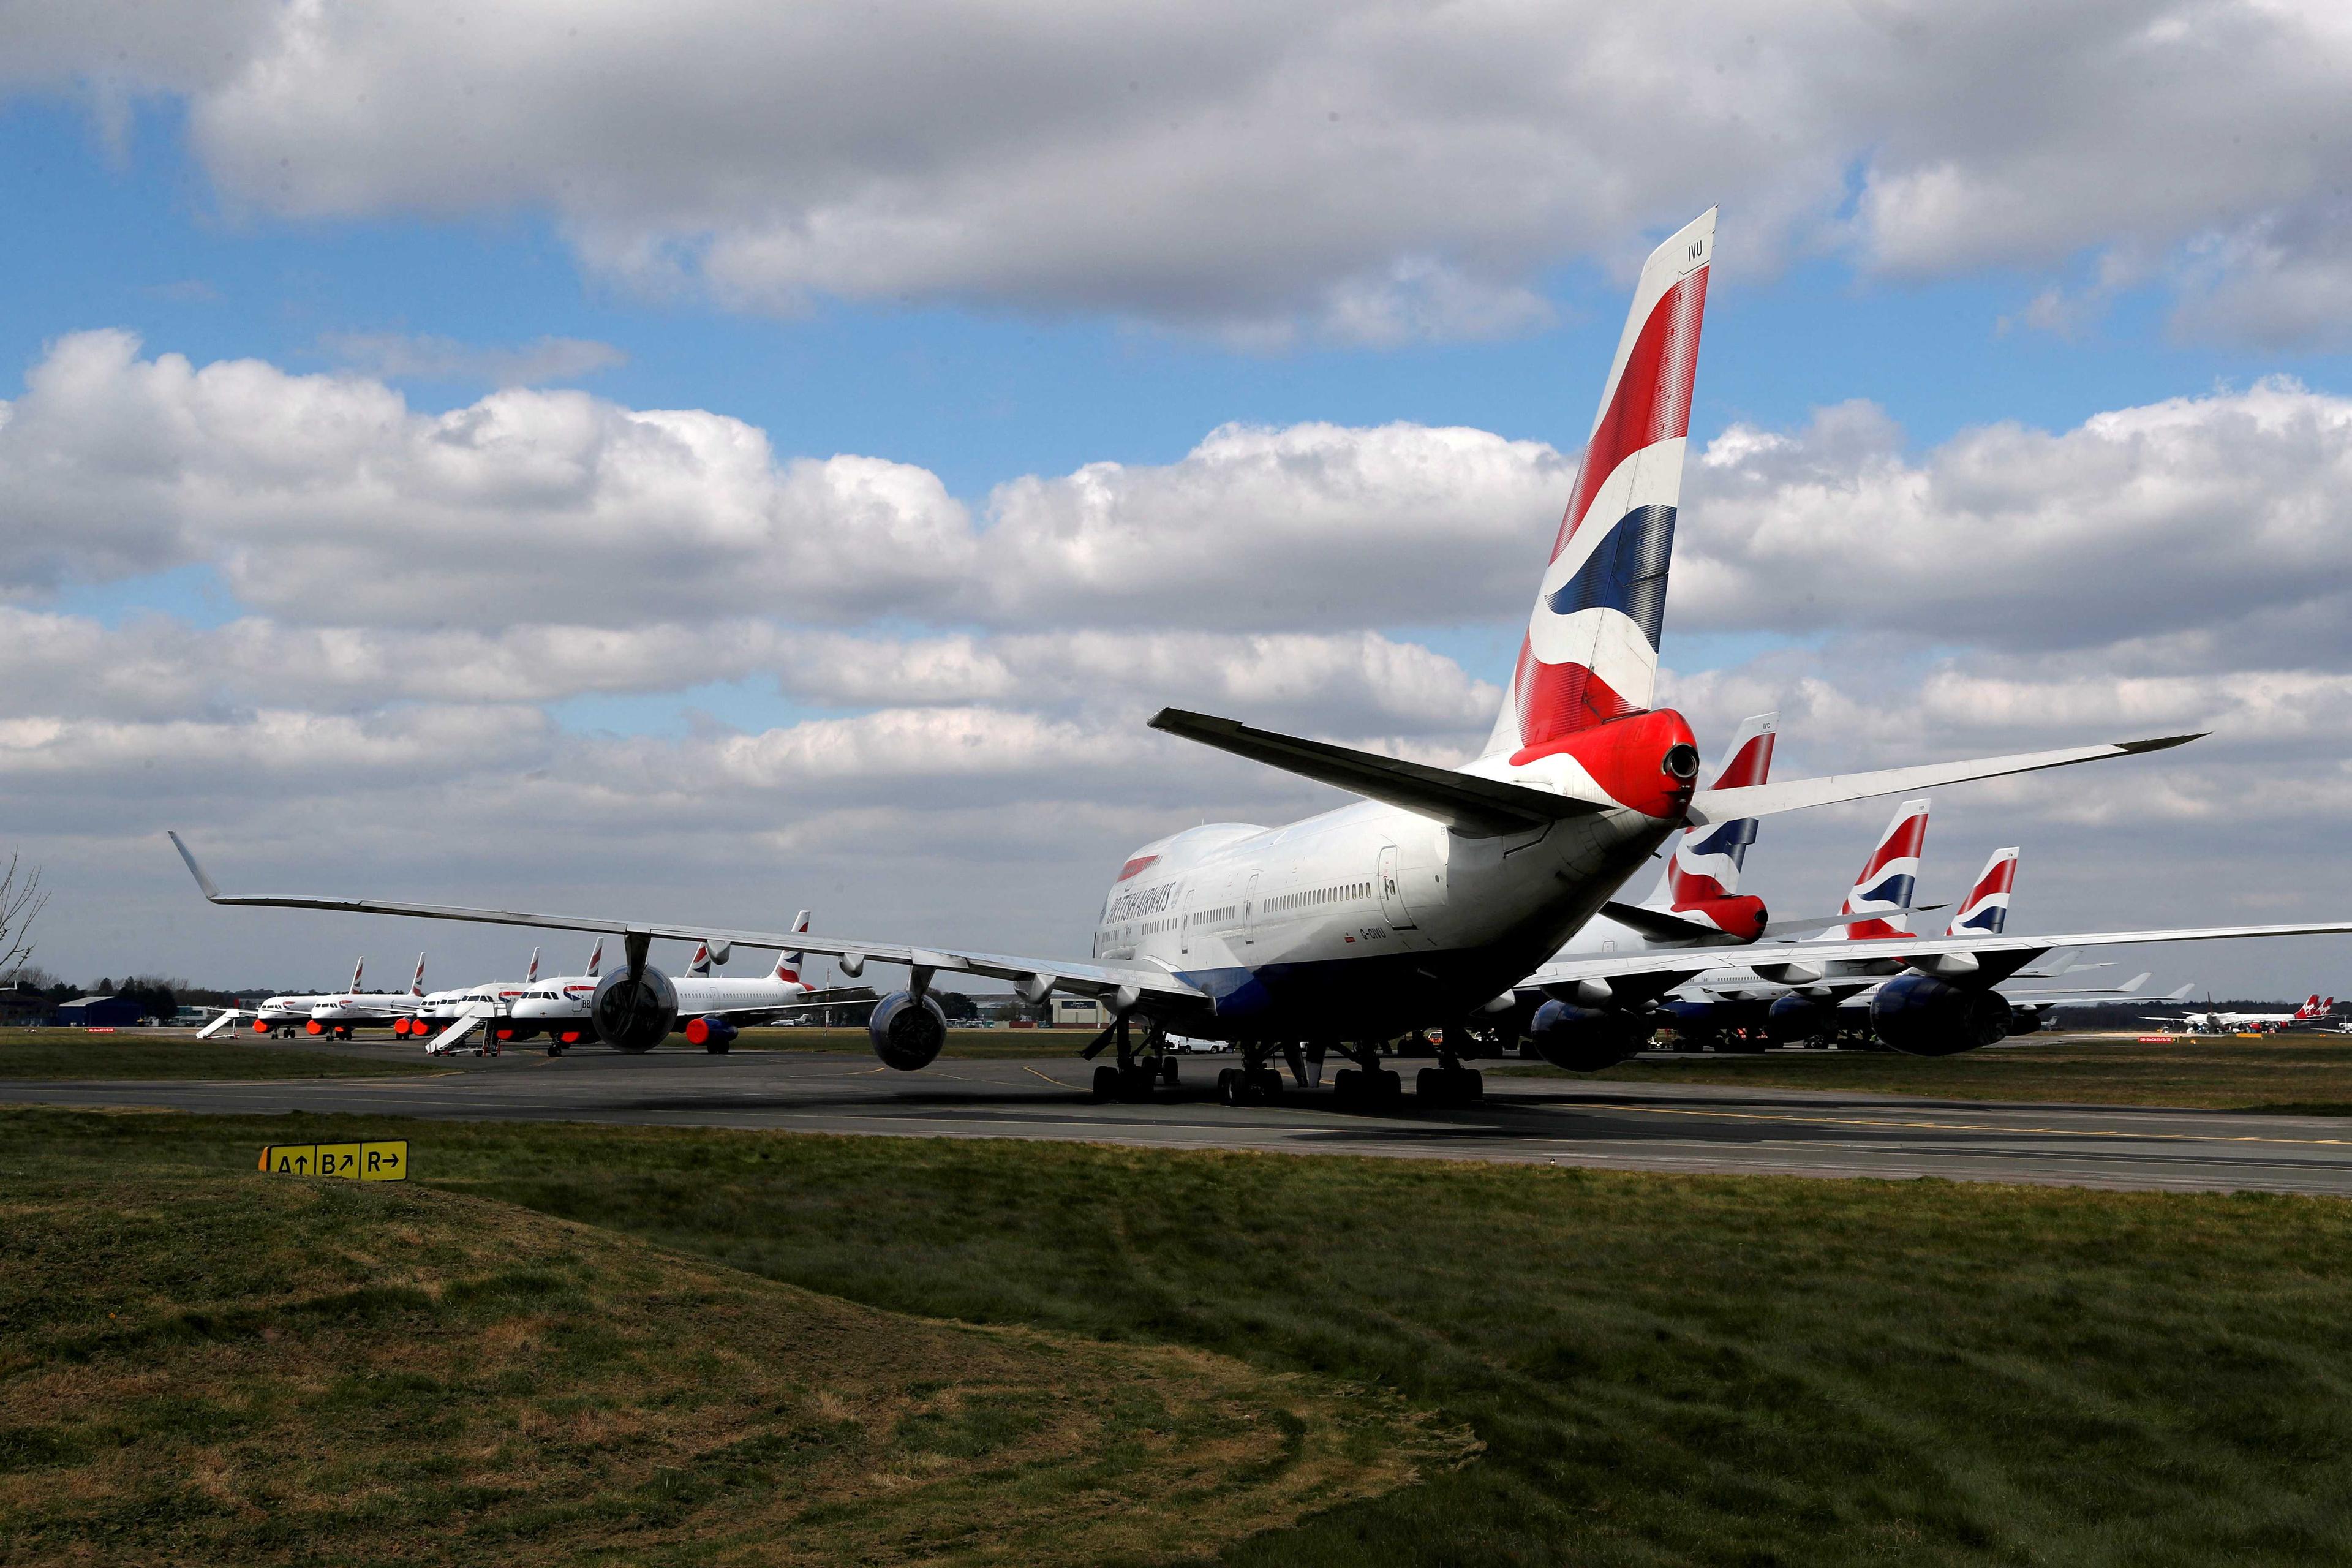 British Airways planes are seen parked at Bournemouth Airport, Bournemouth, Britain, April 1, 2020. Photo: Reuters